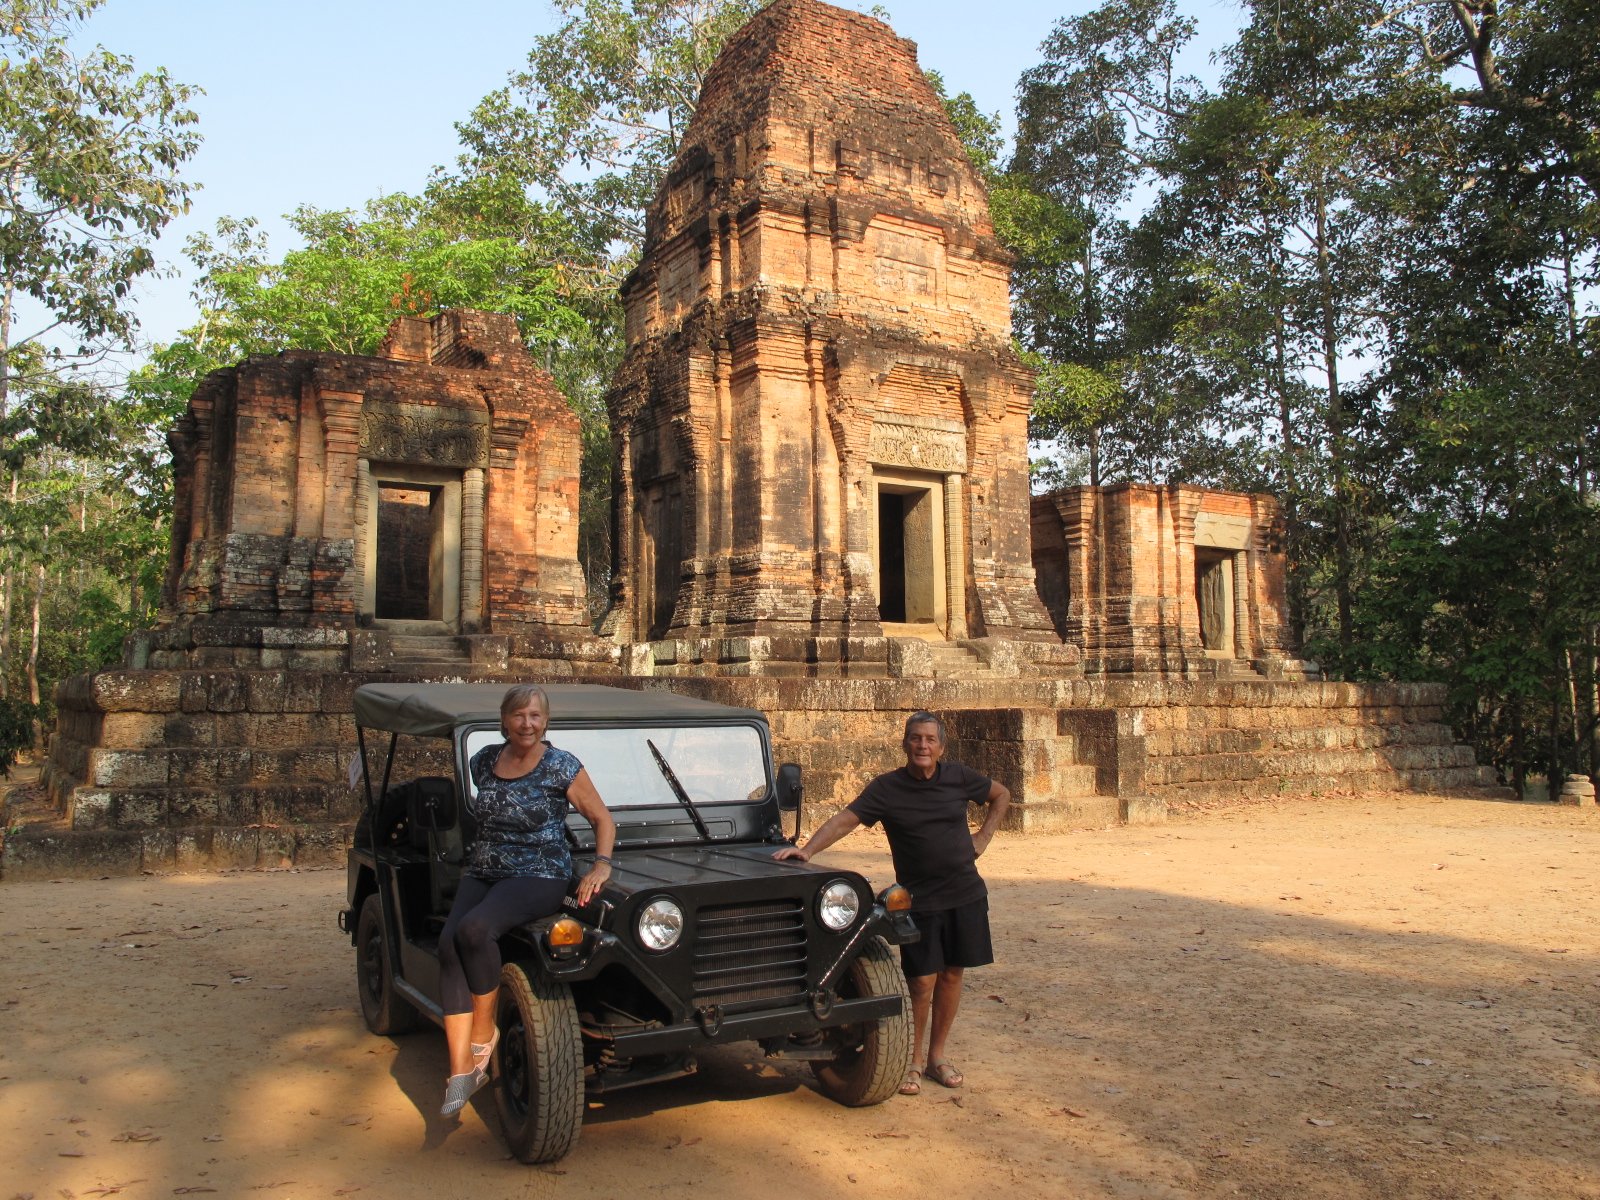 Image of Angkor ‘Tomb Raider’ with an Archaeologist